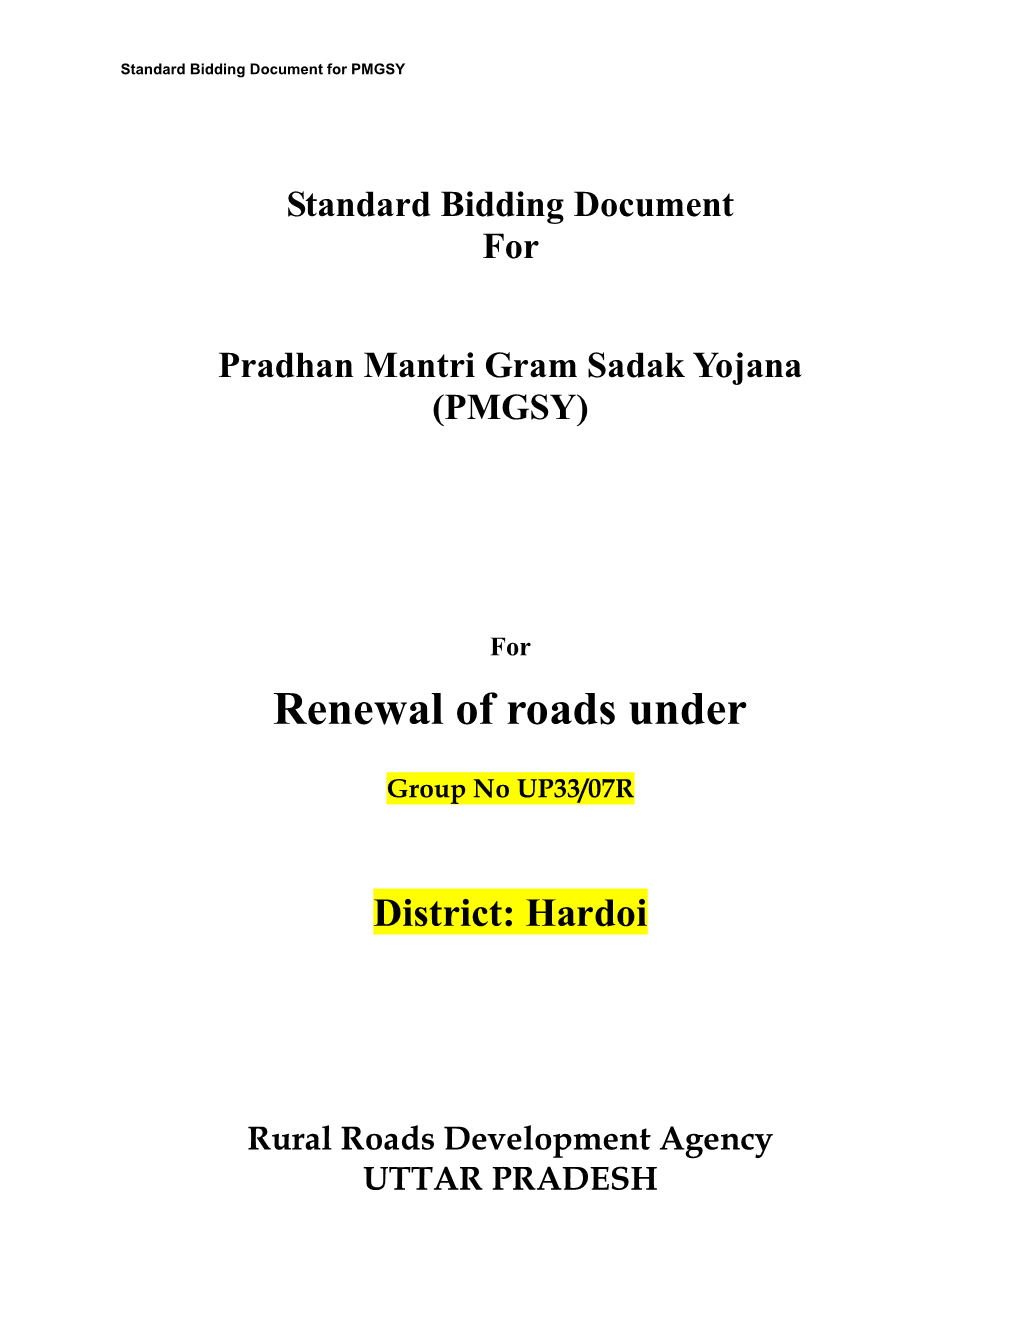 Standard Bidding Document for Pradhan Mantri Gram Sadak Yojana (PMGSY) Follows the Format of the Morth Bidding Document, Which Is Similar to the Format for National